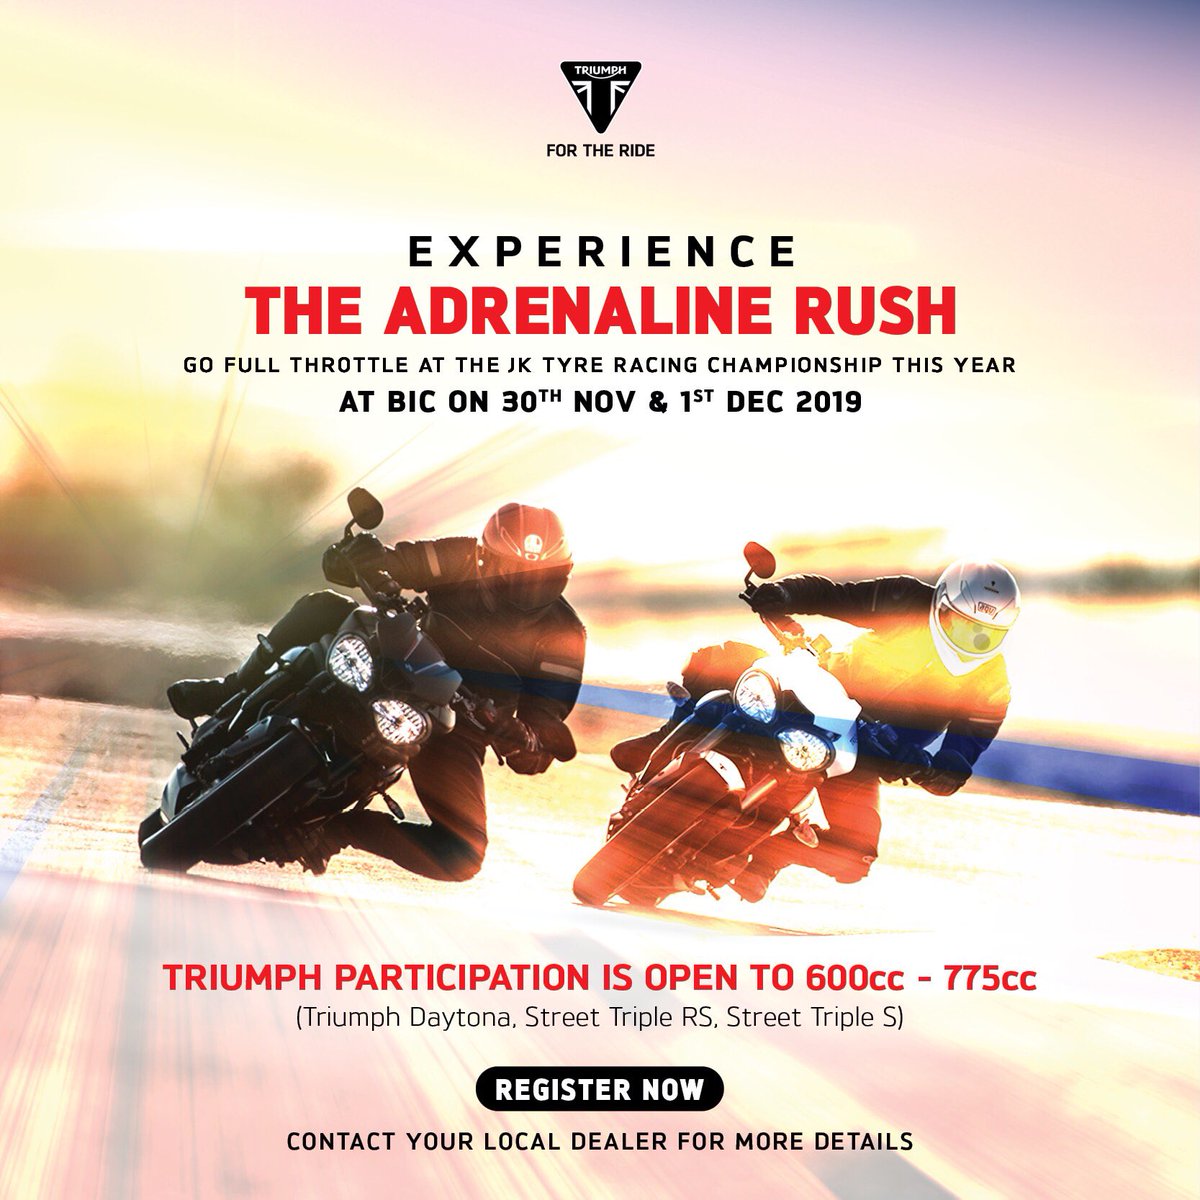 It’s that time of the year when the racetrack buzzes with the sound of the winning Triples. 
Come, be part of the JK Tyres National Racing Championship. Contact your Triumph dealer for details. 
#JKNRC #ForTheRacing #ForTheRide